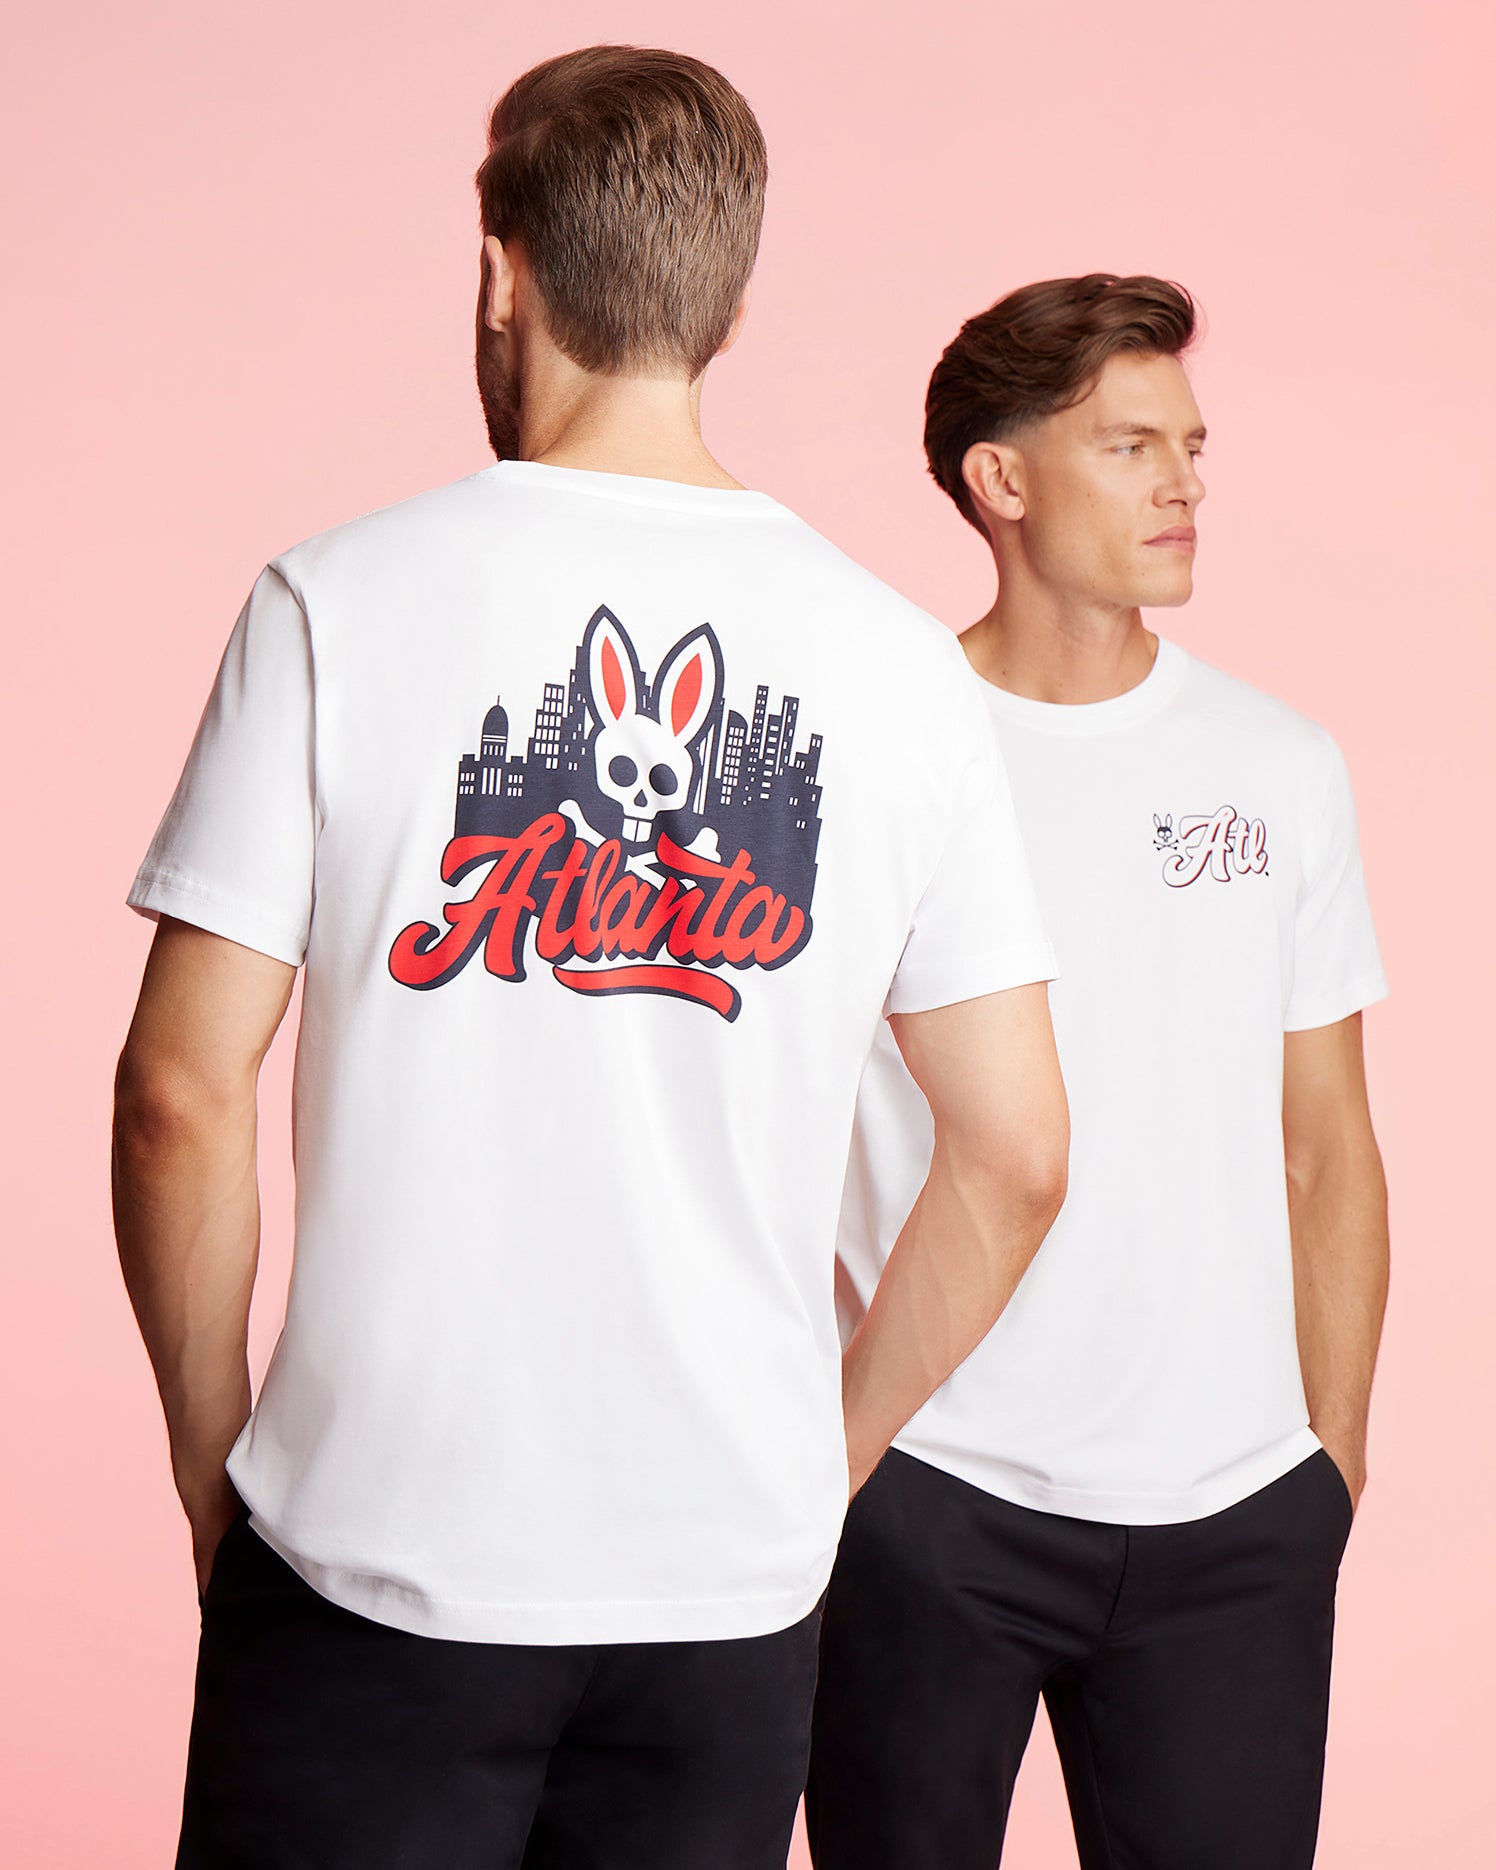 Two men are wearing matching Psycho Bunny MENS ATLANTA CITY TEE - B6U966X1PC tees in luxurious Pima cotton jersey. The back of the shirts features a cartoon skull with bunny ears, a cityscape, and the word 